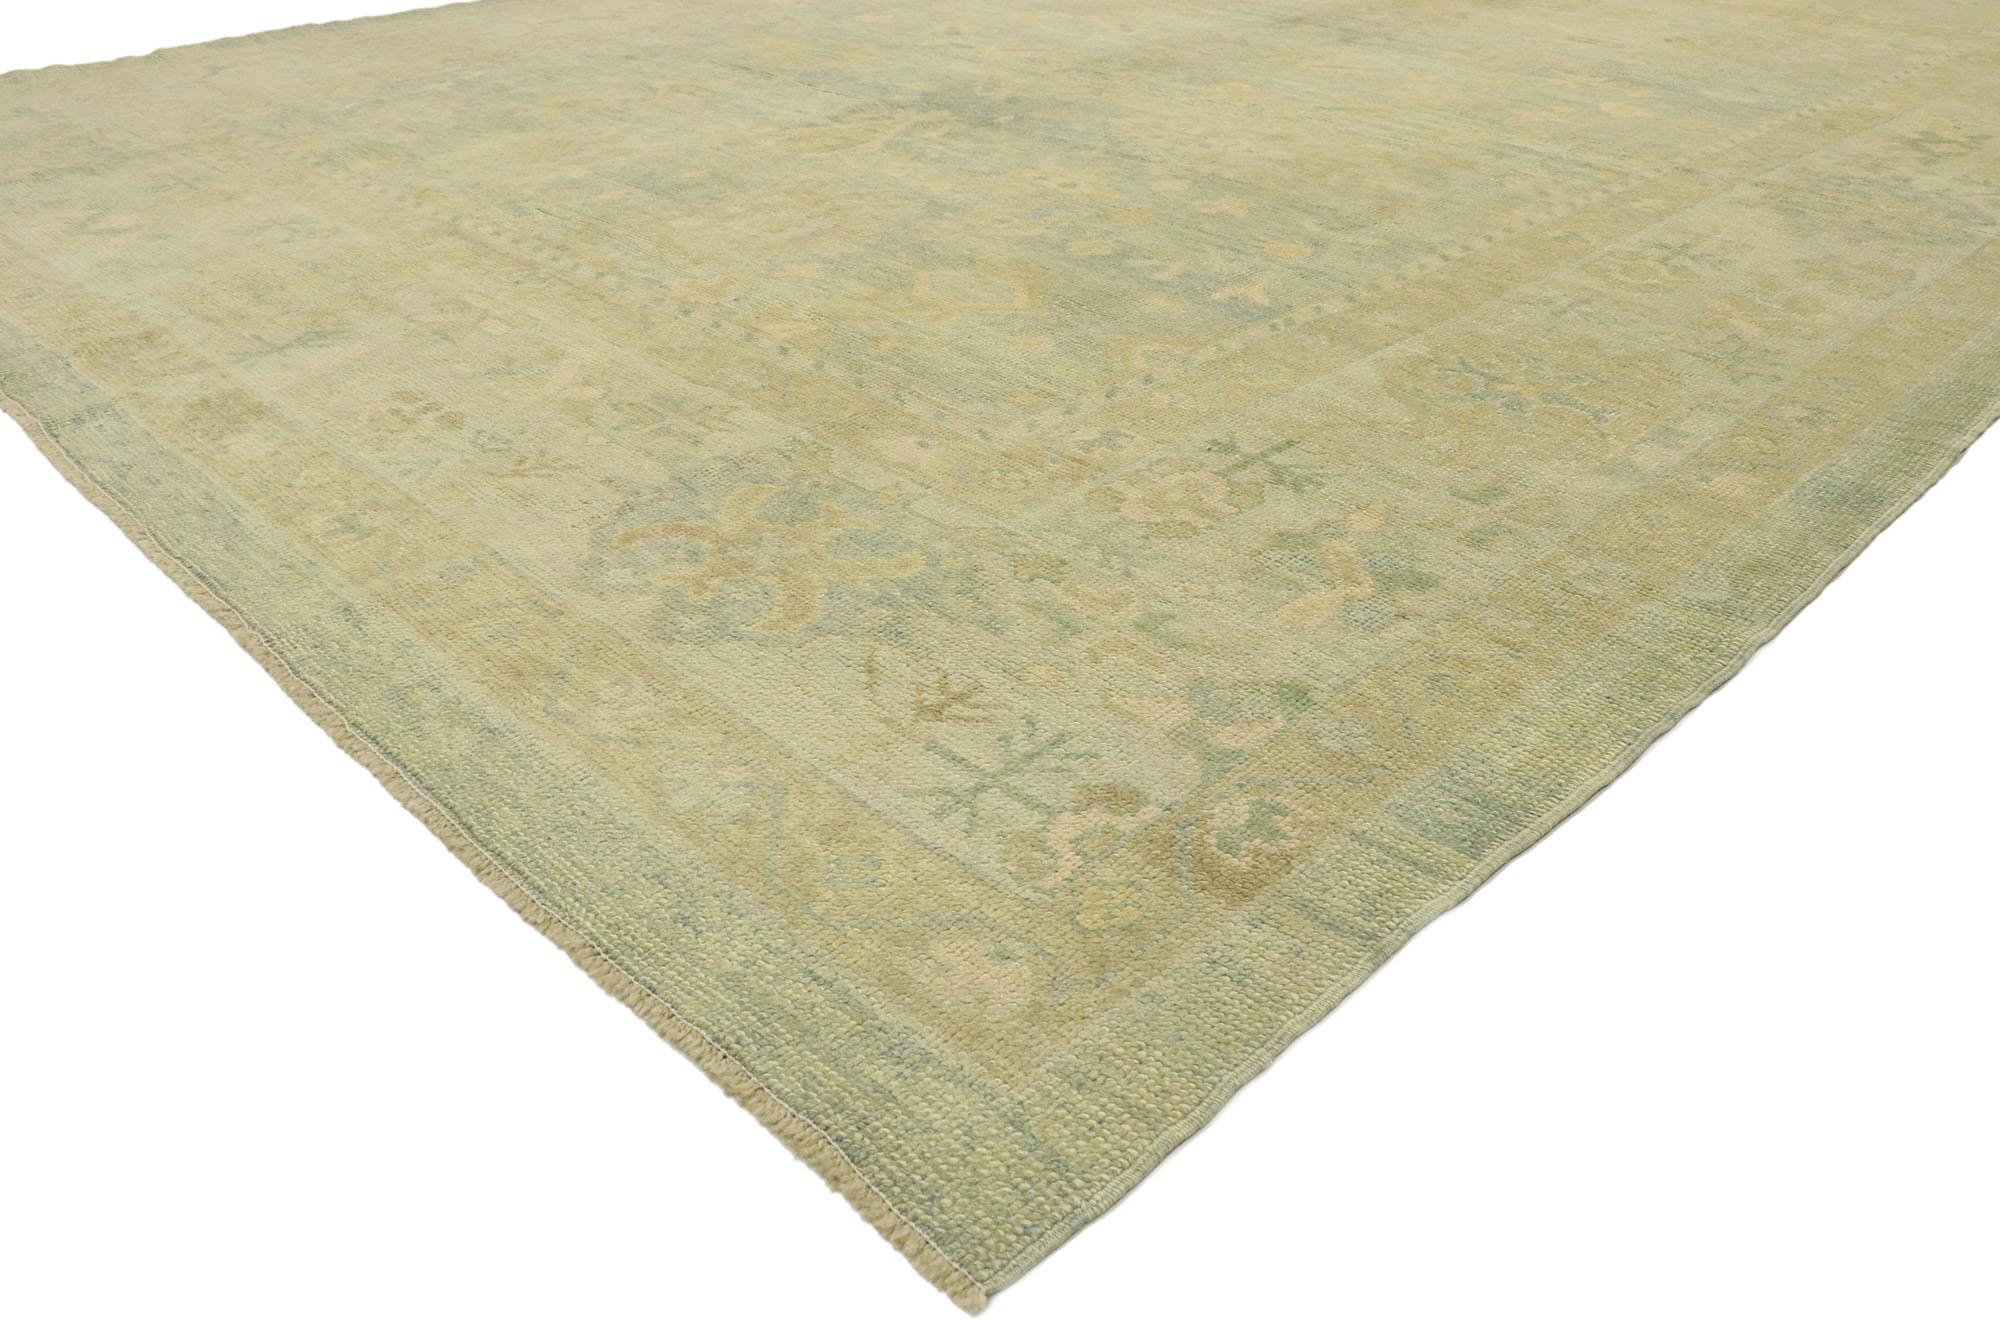 53151, new contemporary Turkish Oushak rug with Modern Transitional style. Blending elements from the modern world with neutral tones and subtle pastel colors, this hand knotted wool contemporary Turkish Oushak rug will boost the coziness factor in